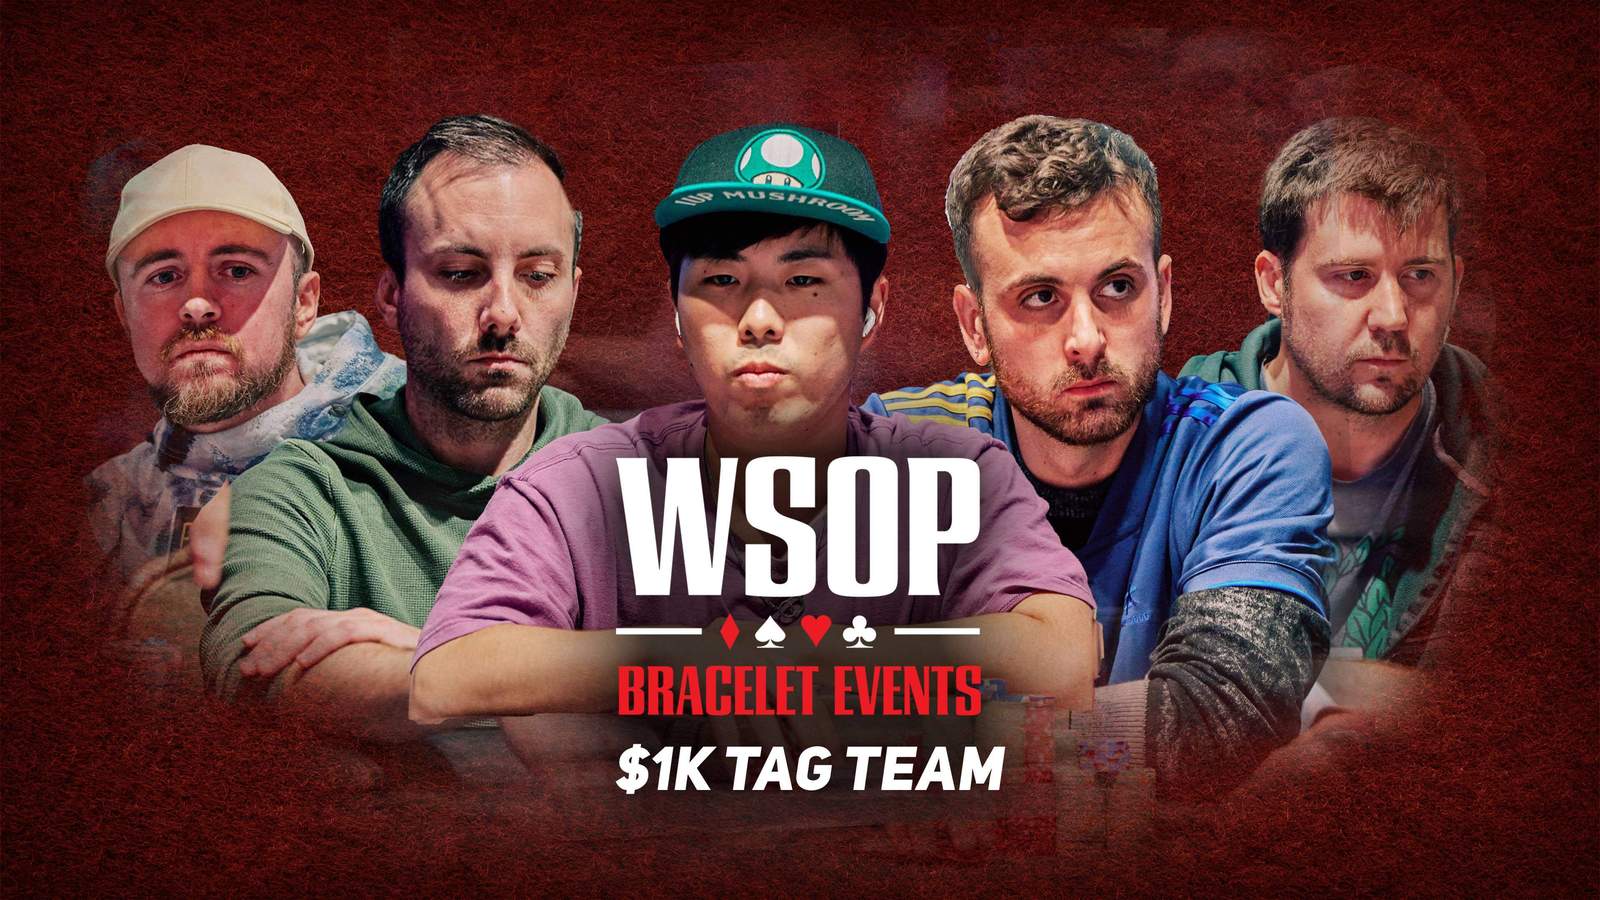 Watch the WSOP Event #55: $1K Tag Team Final Table on PokerGO.com at 8 p.m. ET